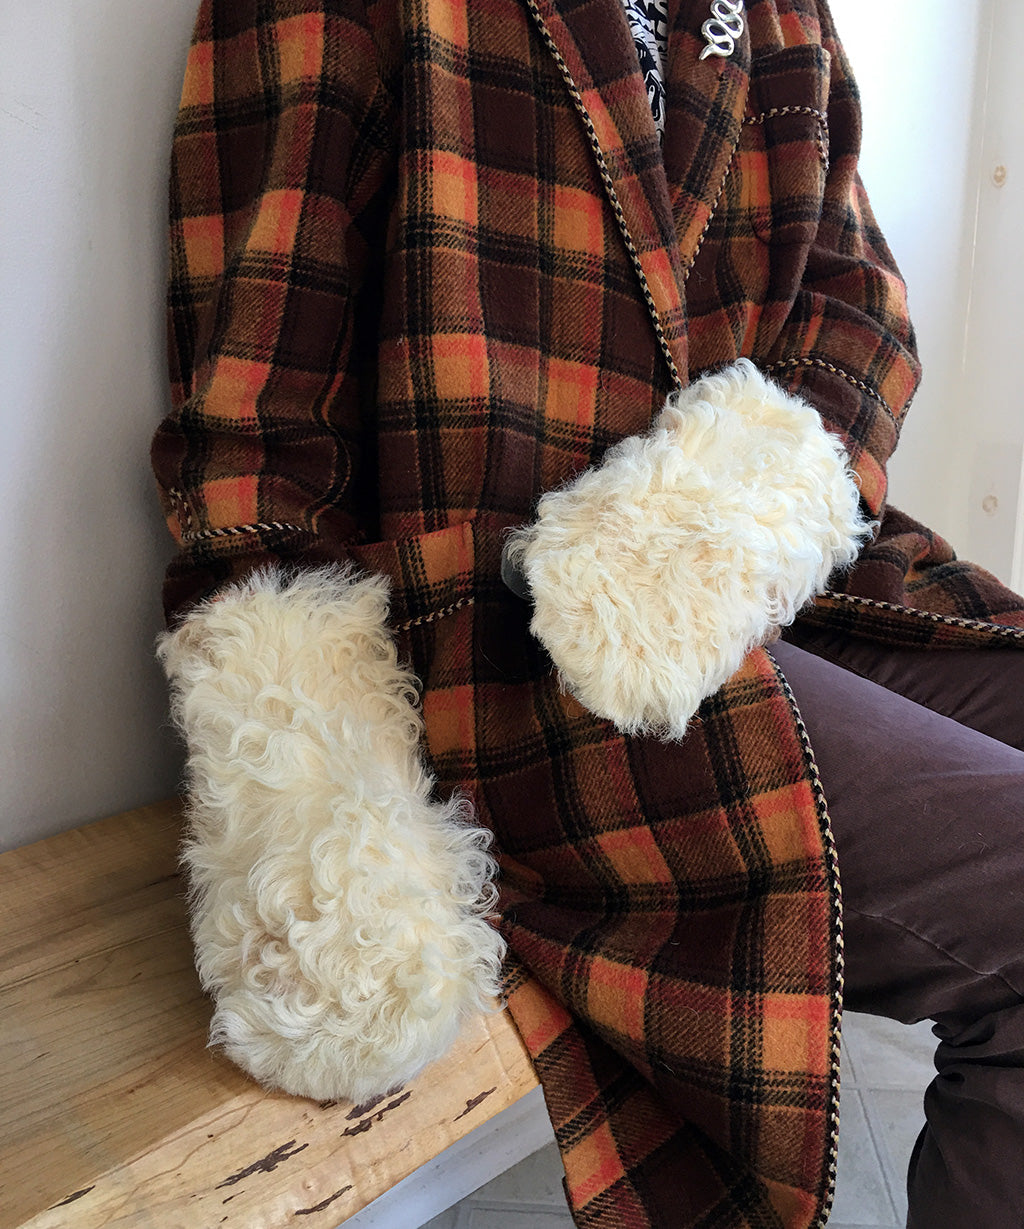 Women's Medium Eco-Friendly Real Fur Mittens - White Curly Sheep